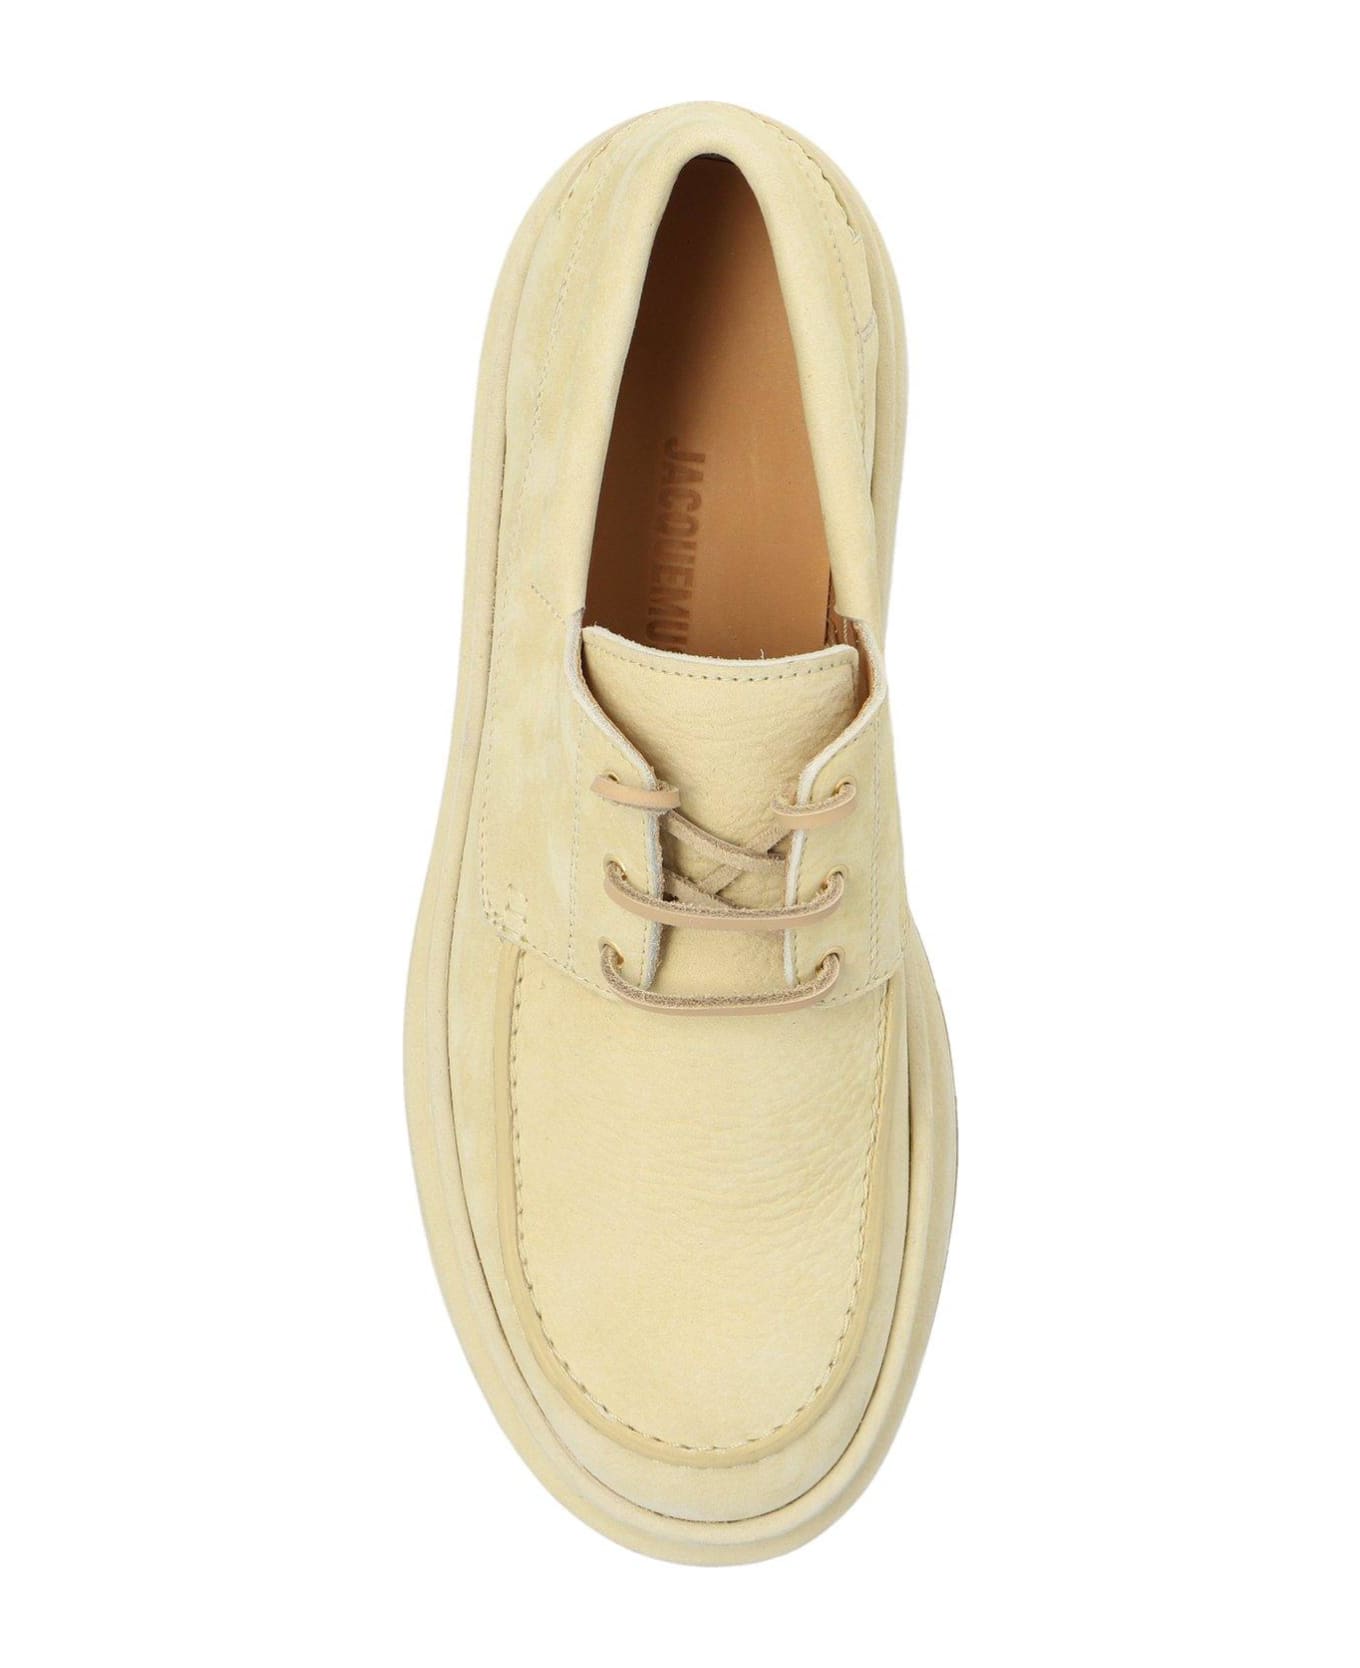 Jacquemus Double Boat Shoes - YELLOW レースアップシューズ